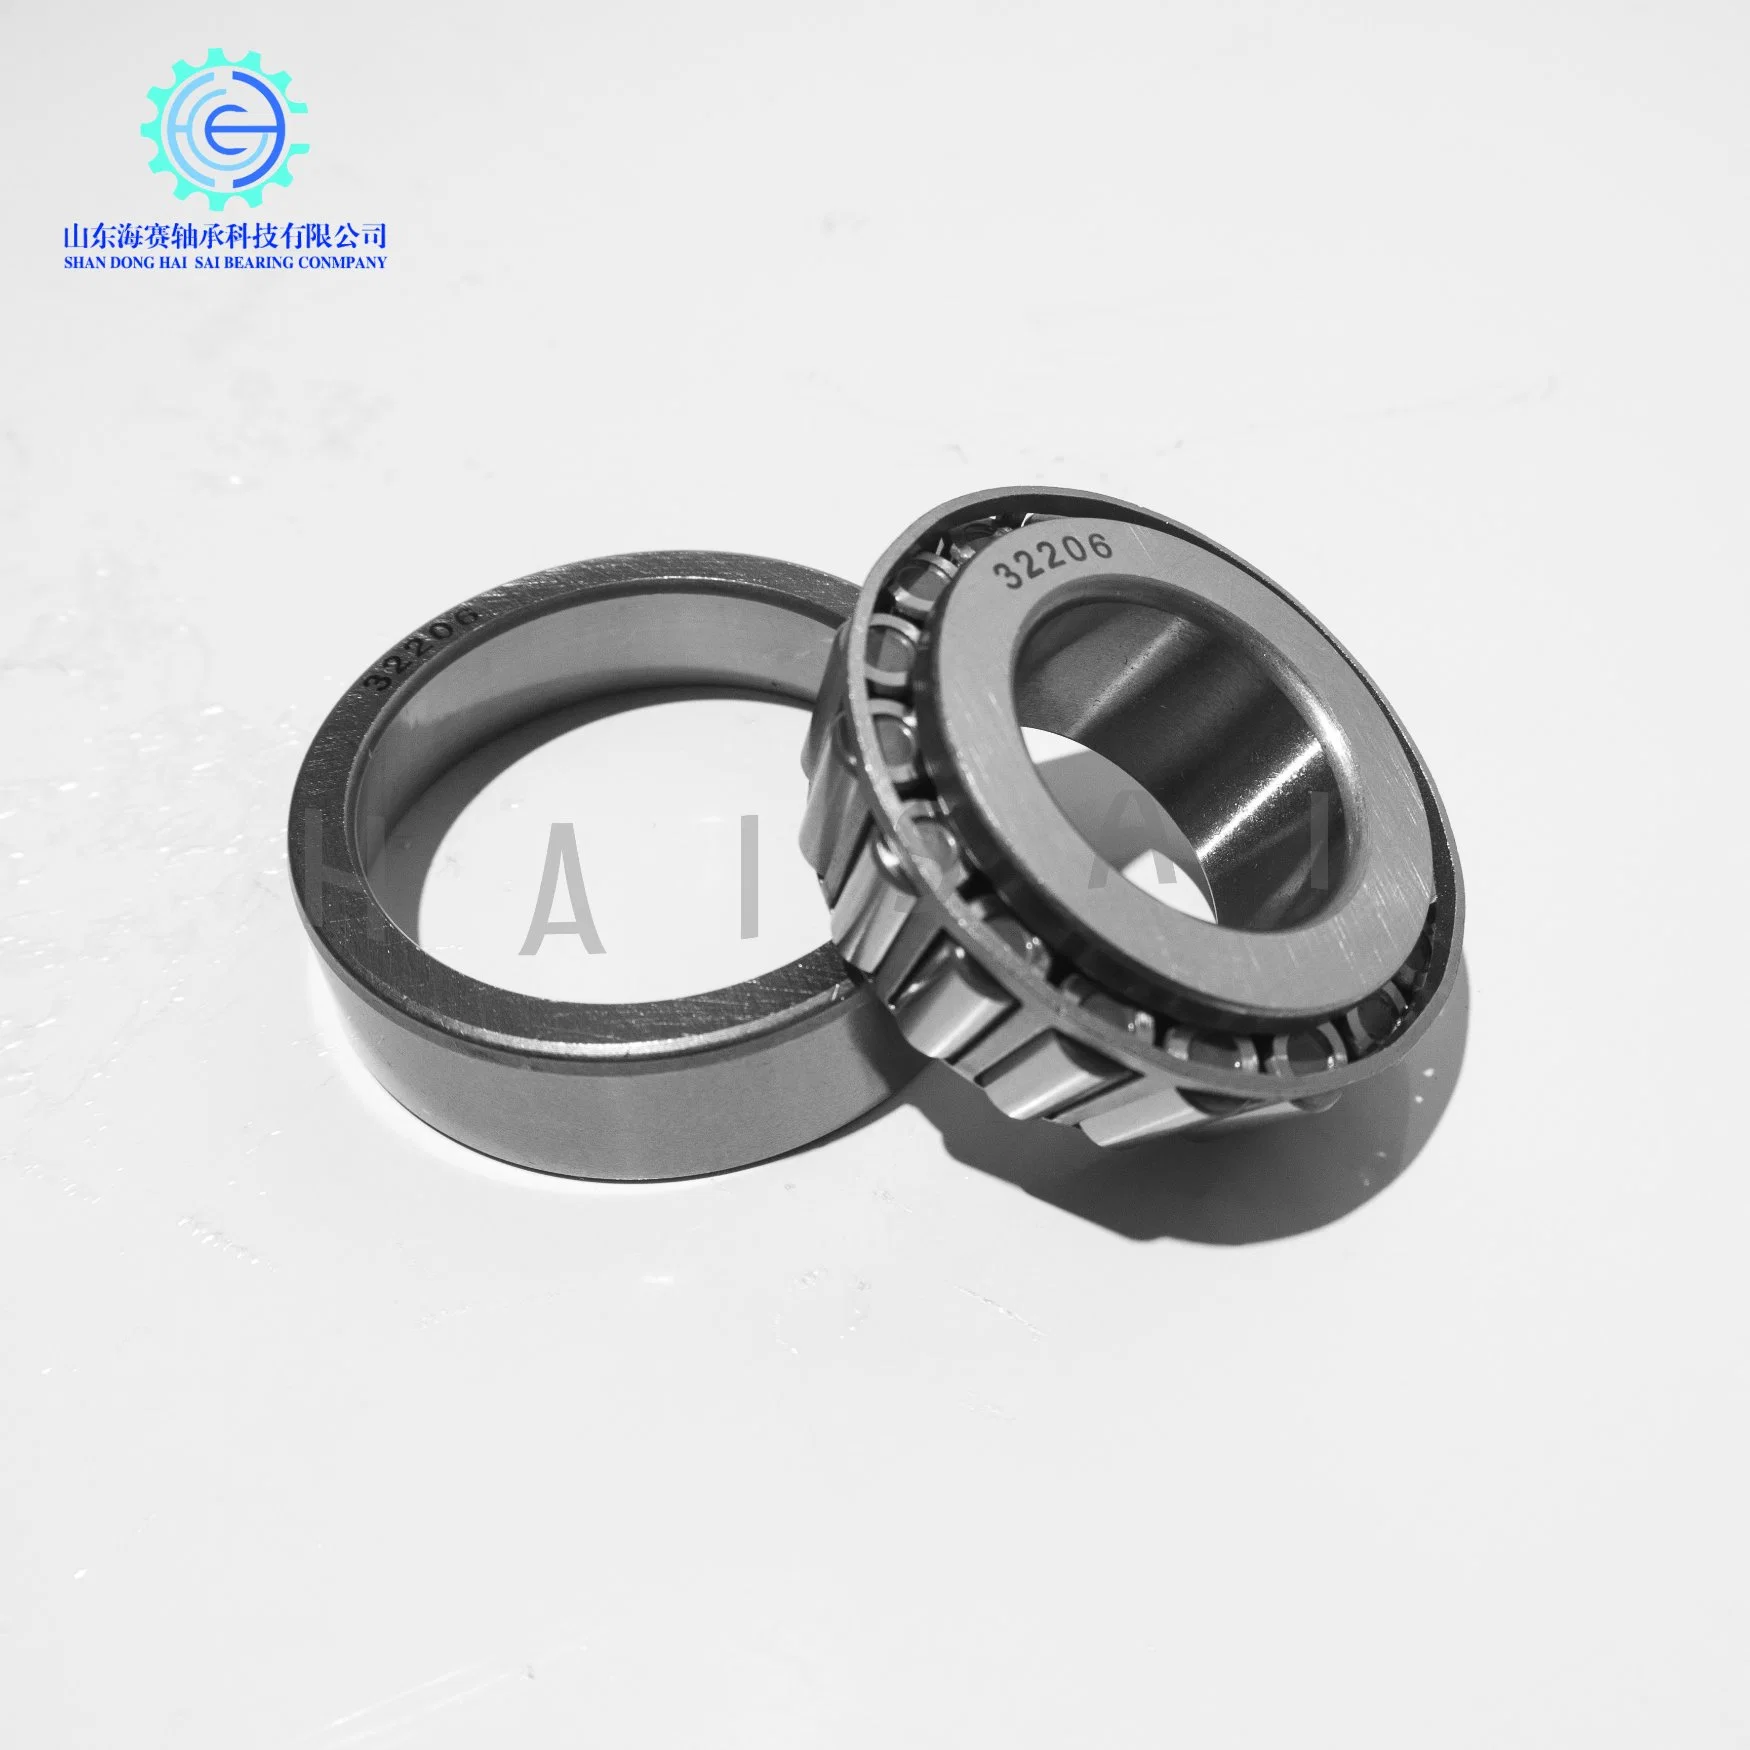 Hm518445/10 L45449/10 M12649/10 Lm11749/10 Lm48548/10 Hot Selling Inch Taper Roller Bearing 102949/10 104949/11A 802048/11 88048/10 88649/10